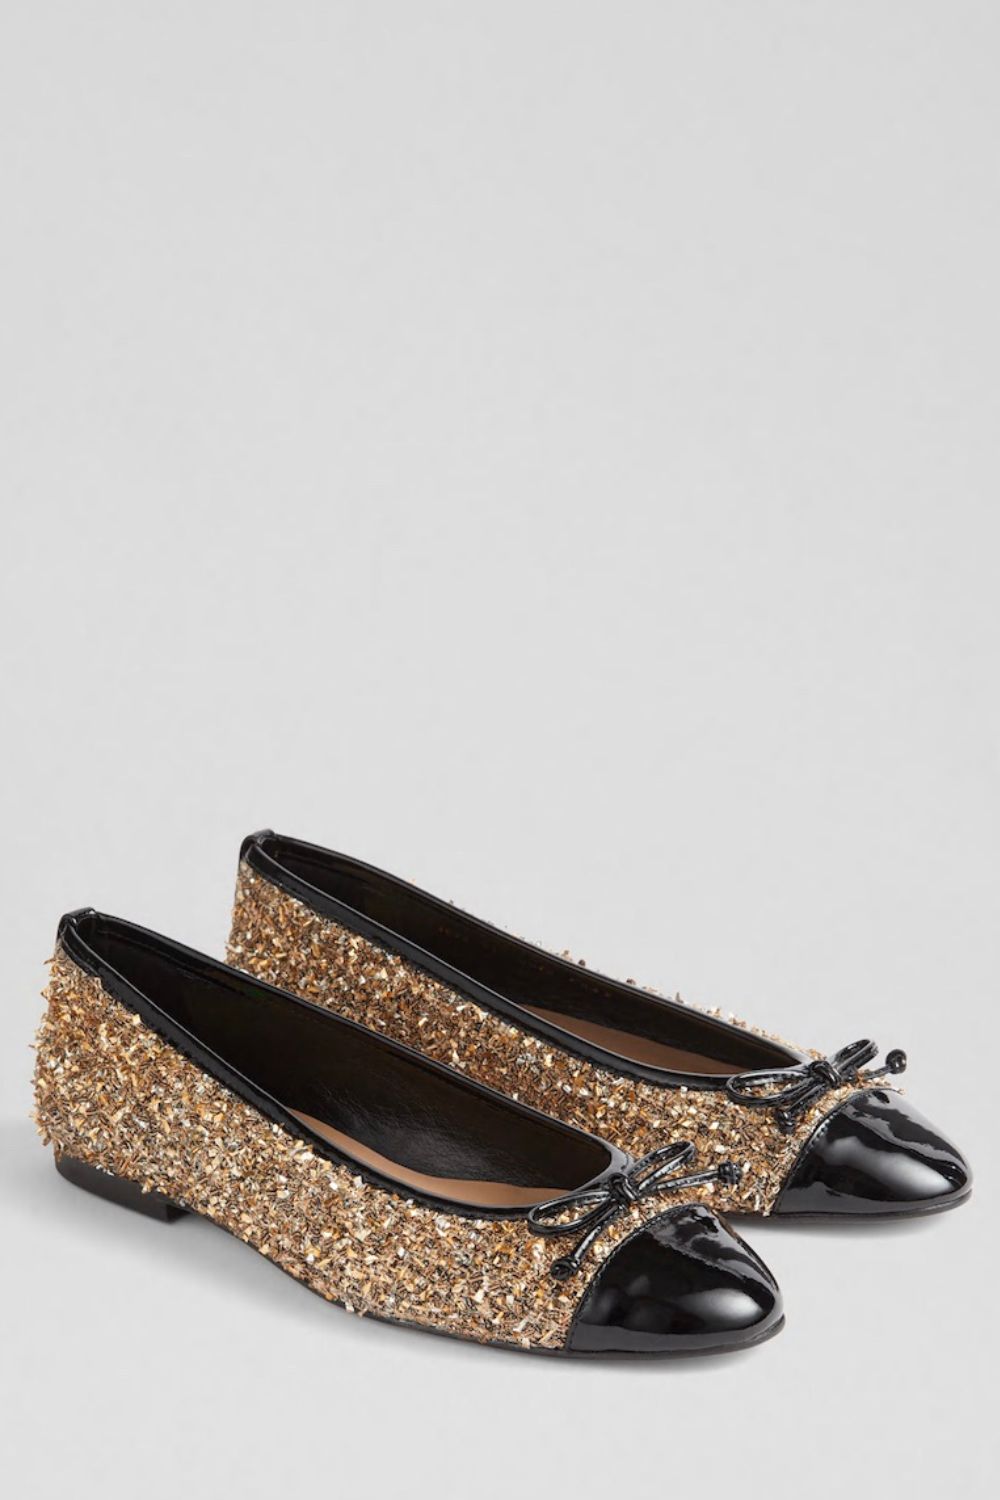 The-Gloss-Magazine-best-party-flats-3